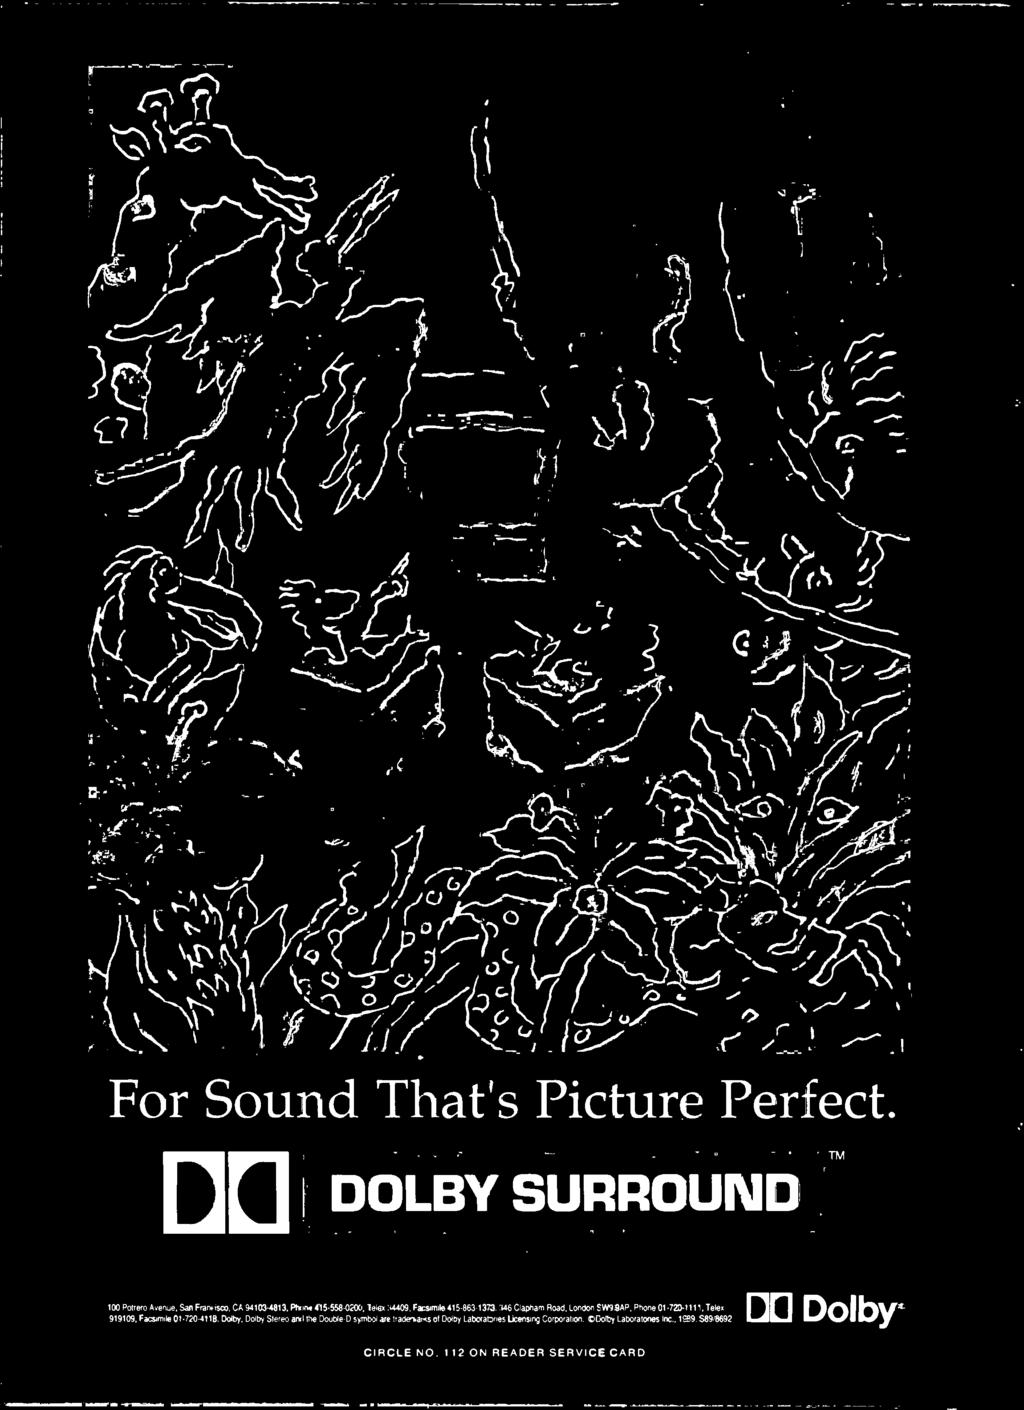 Dolby, Dolby Stereo anti the Double -D symbol are tradenams of Dolby